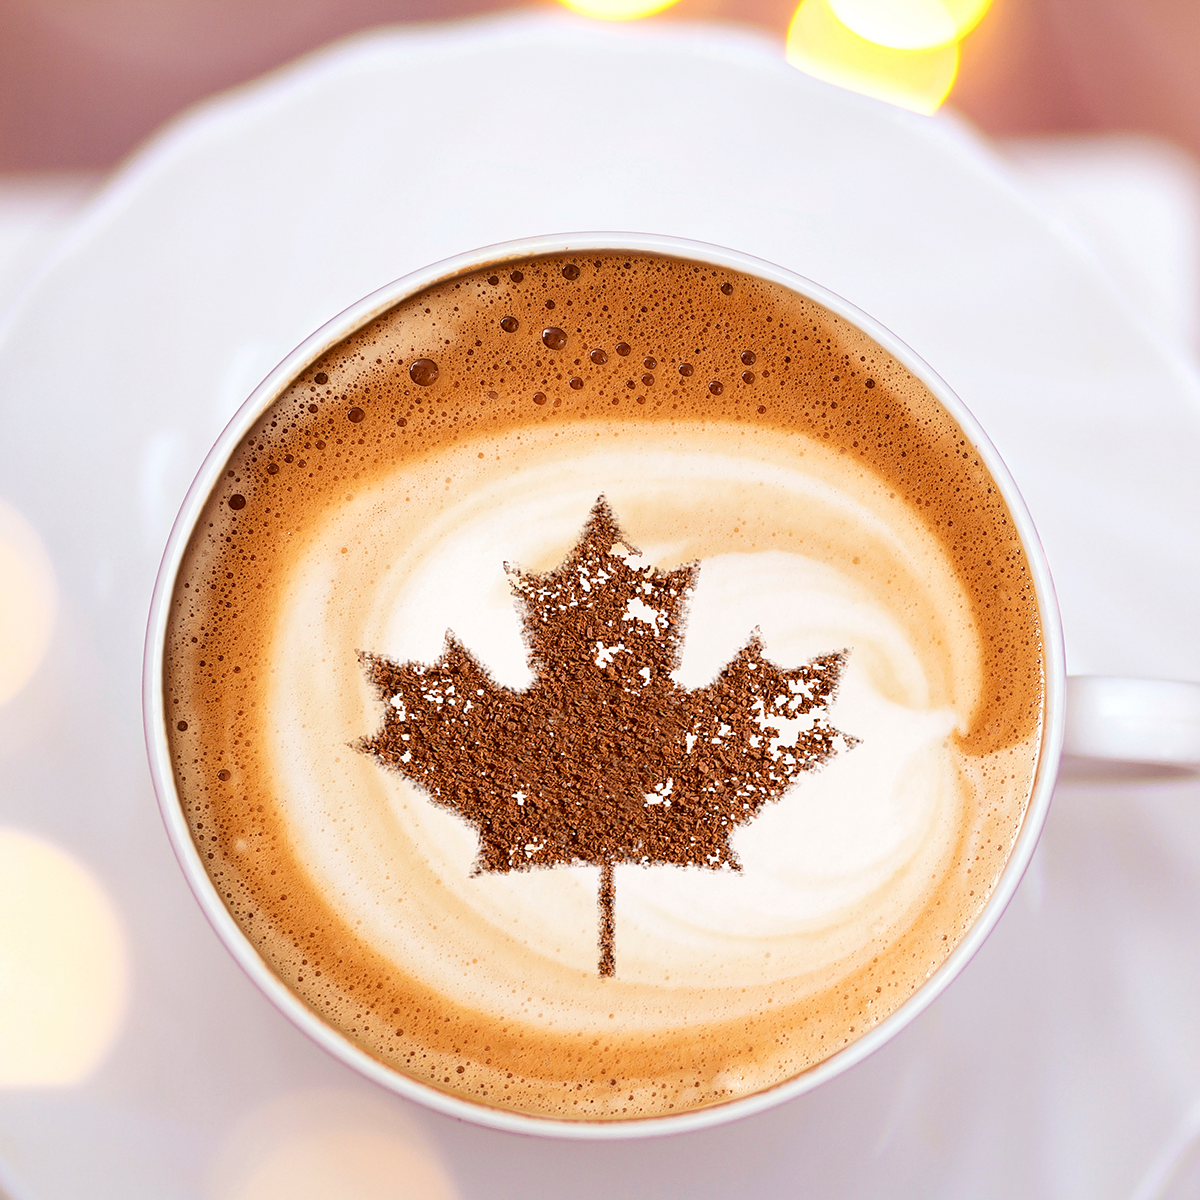 Office coffee services at Montreal and Toronto